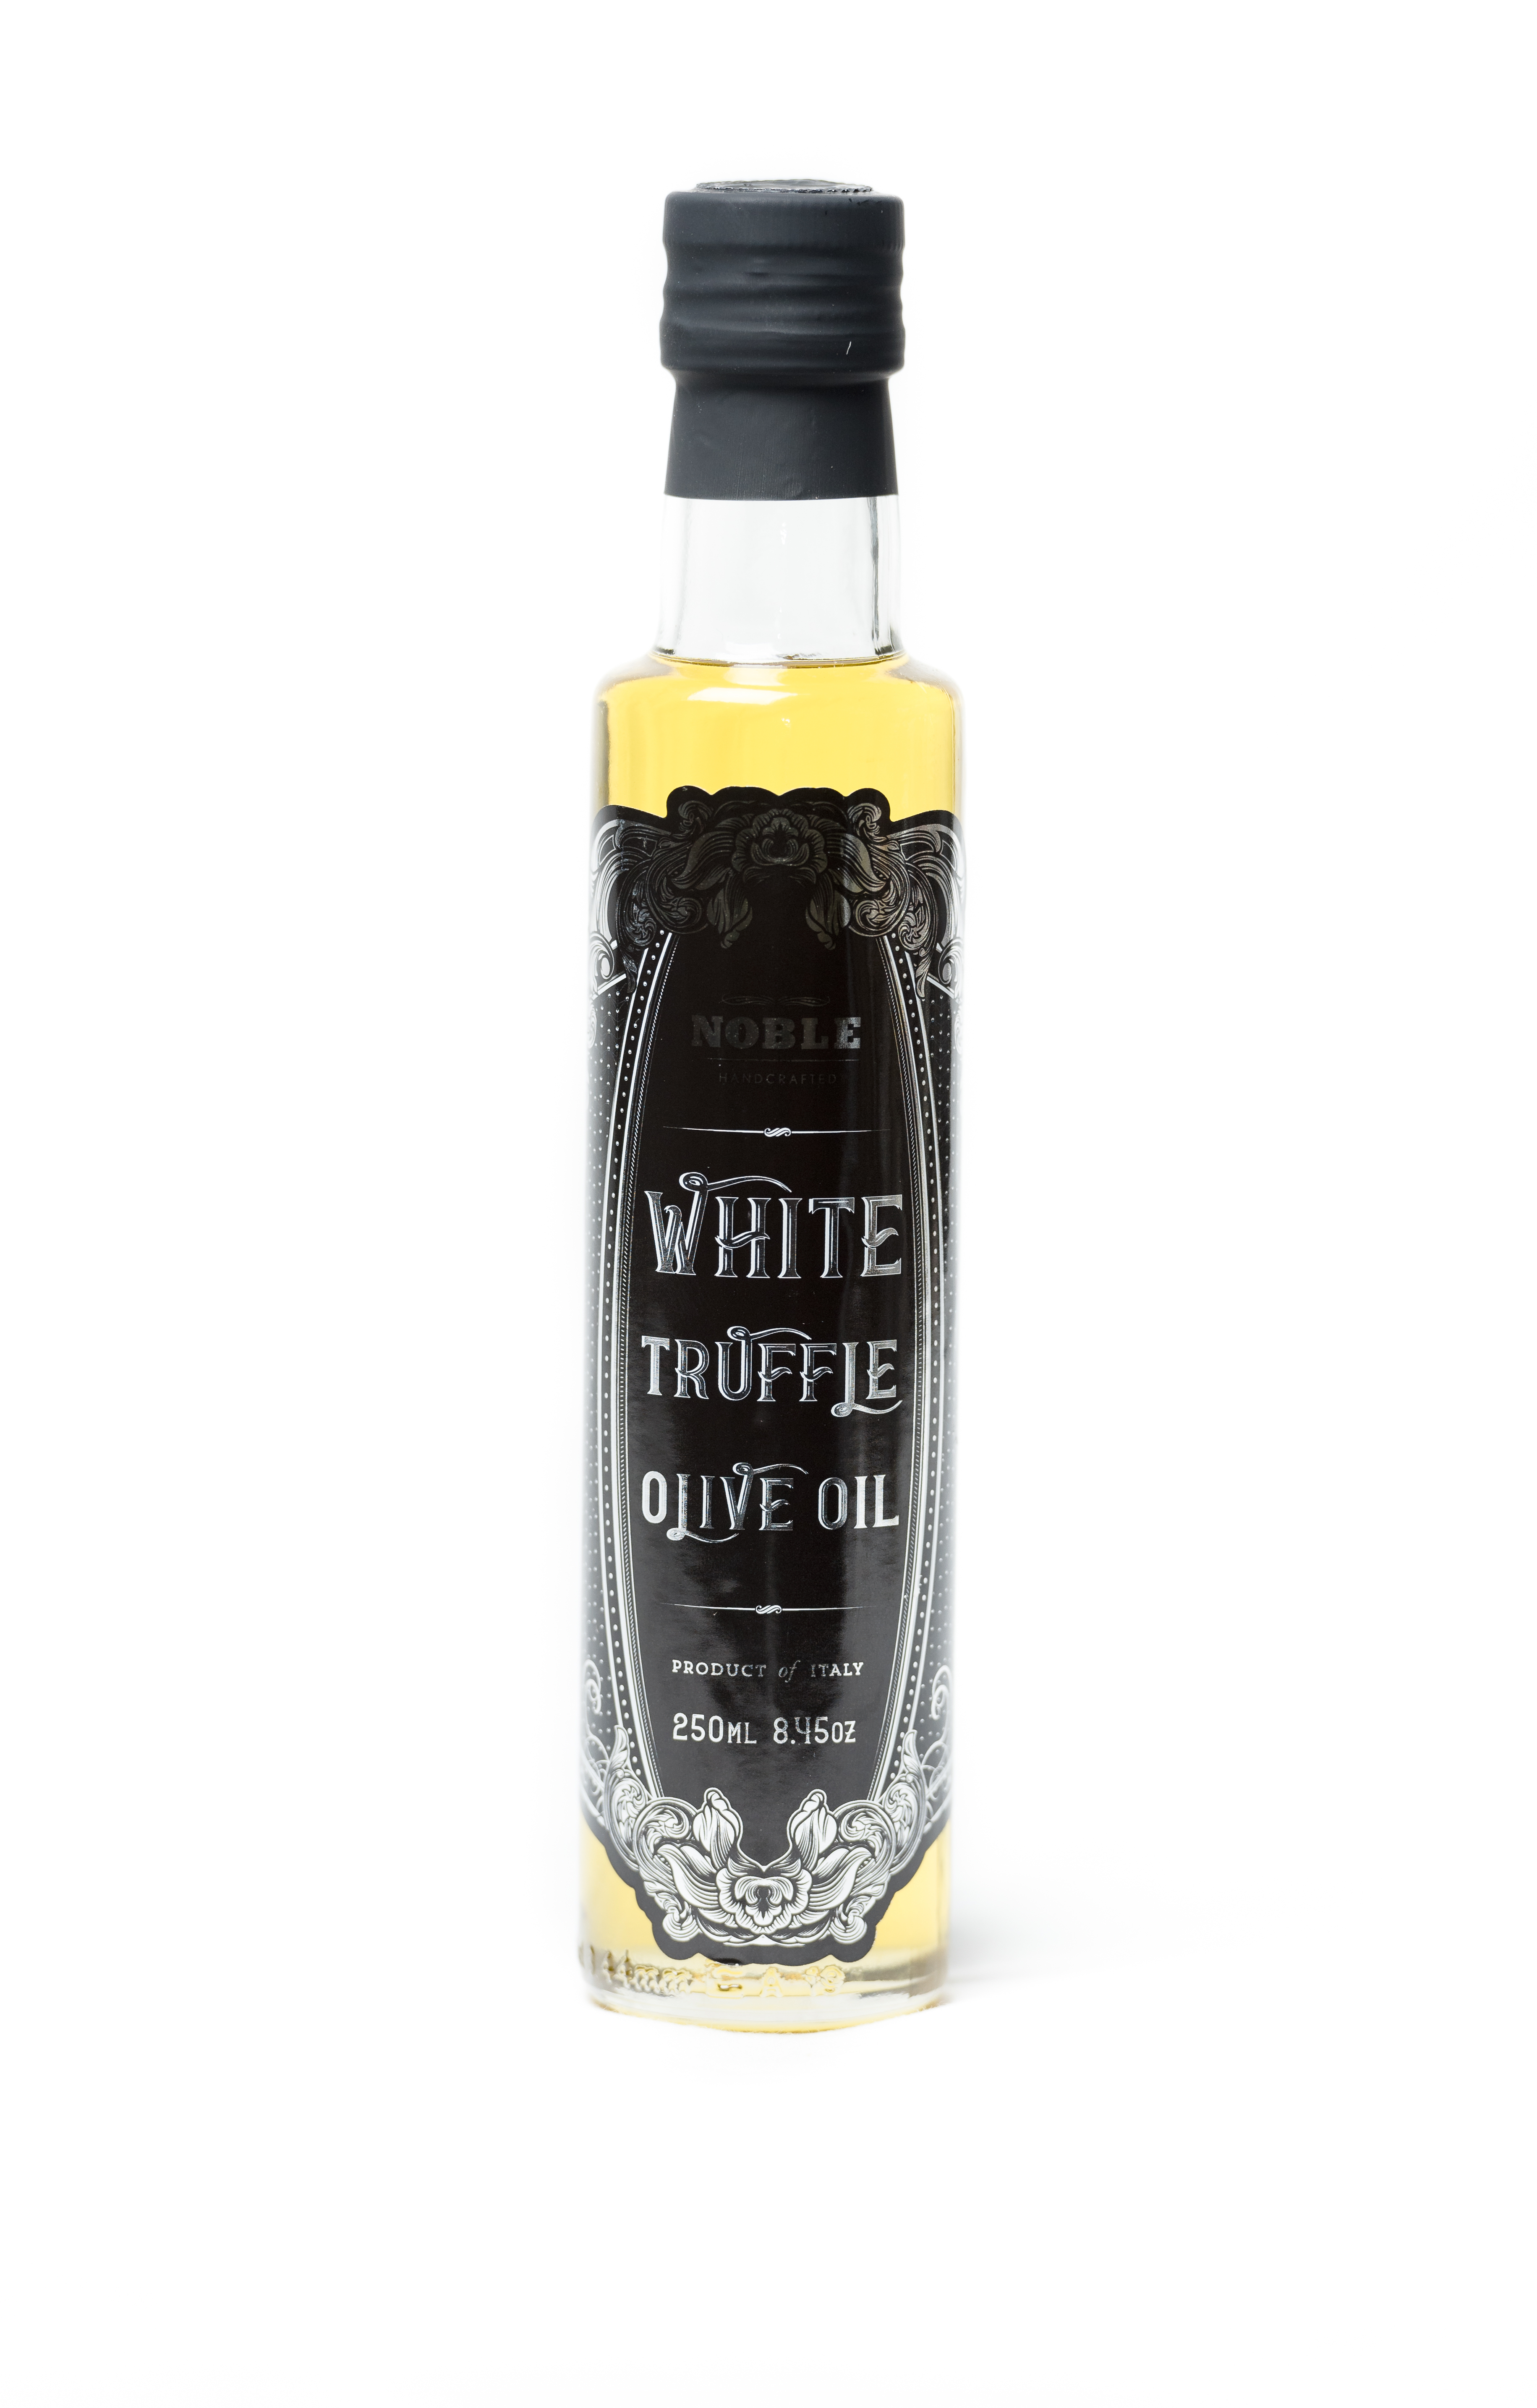 White Truffle Oil, Noble Handcrafted / 250ml